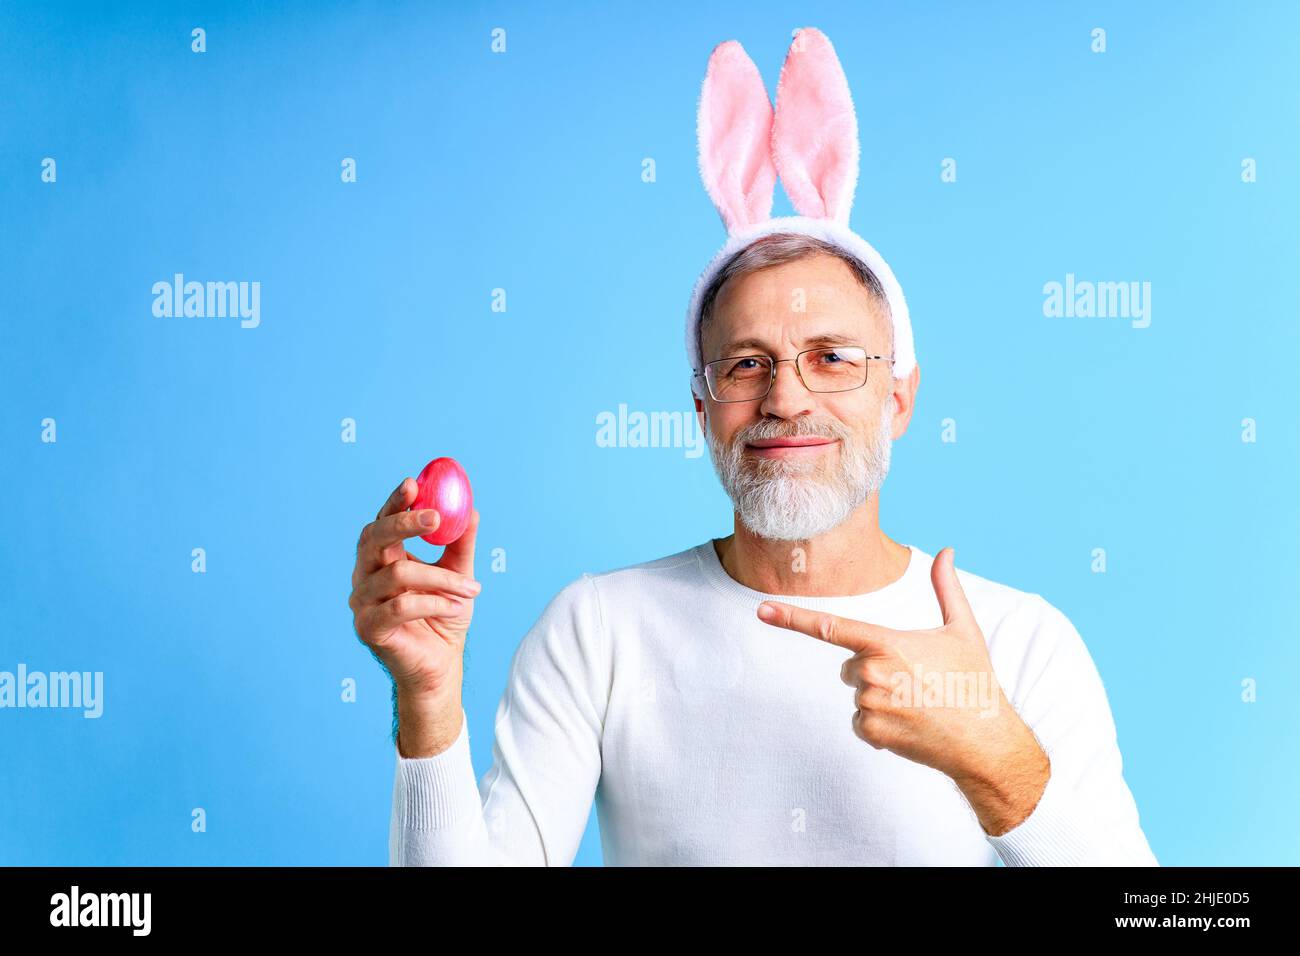 Cute mature man with bunny ears holding Easter egg on blue color background Stock Photo